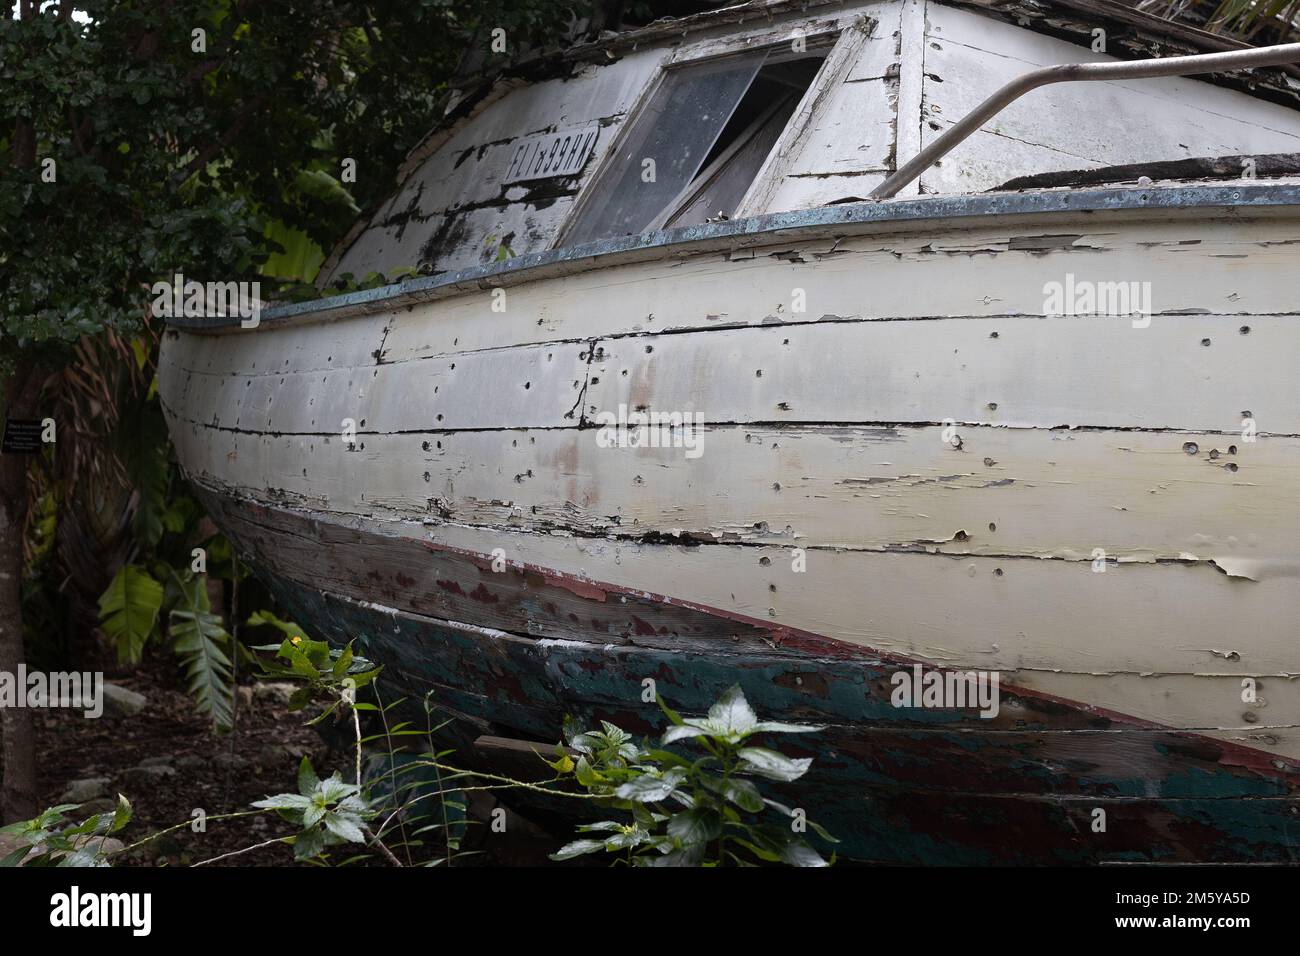 A display of chug boats - Cuban refugee boats - in Key West, Florida. Stock Photo